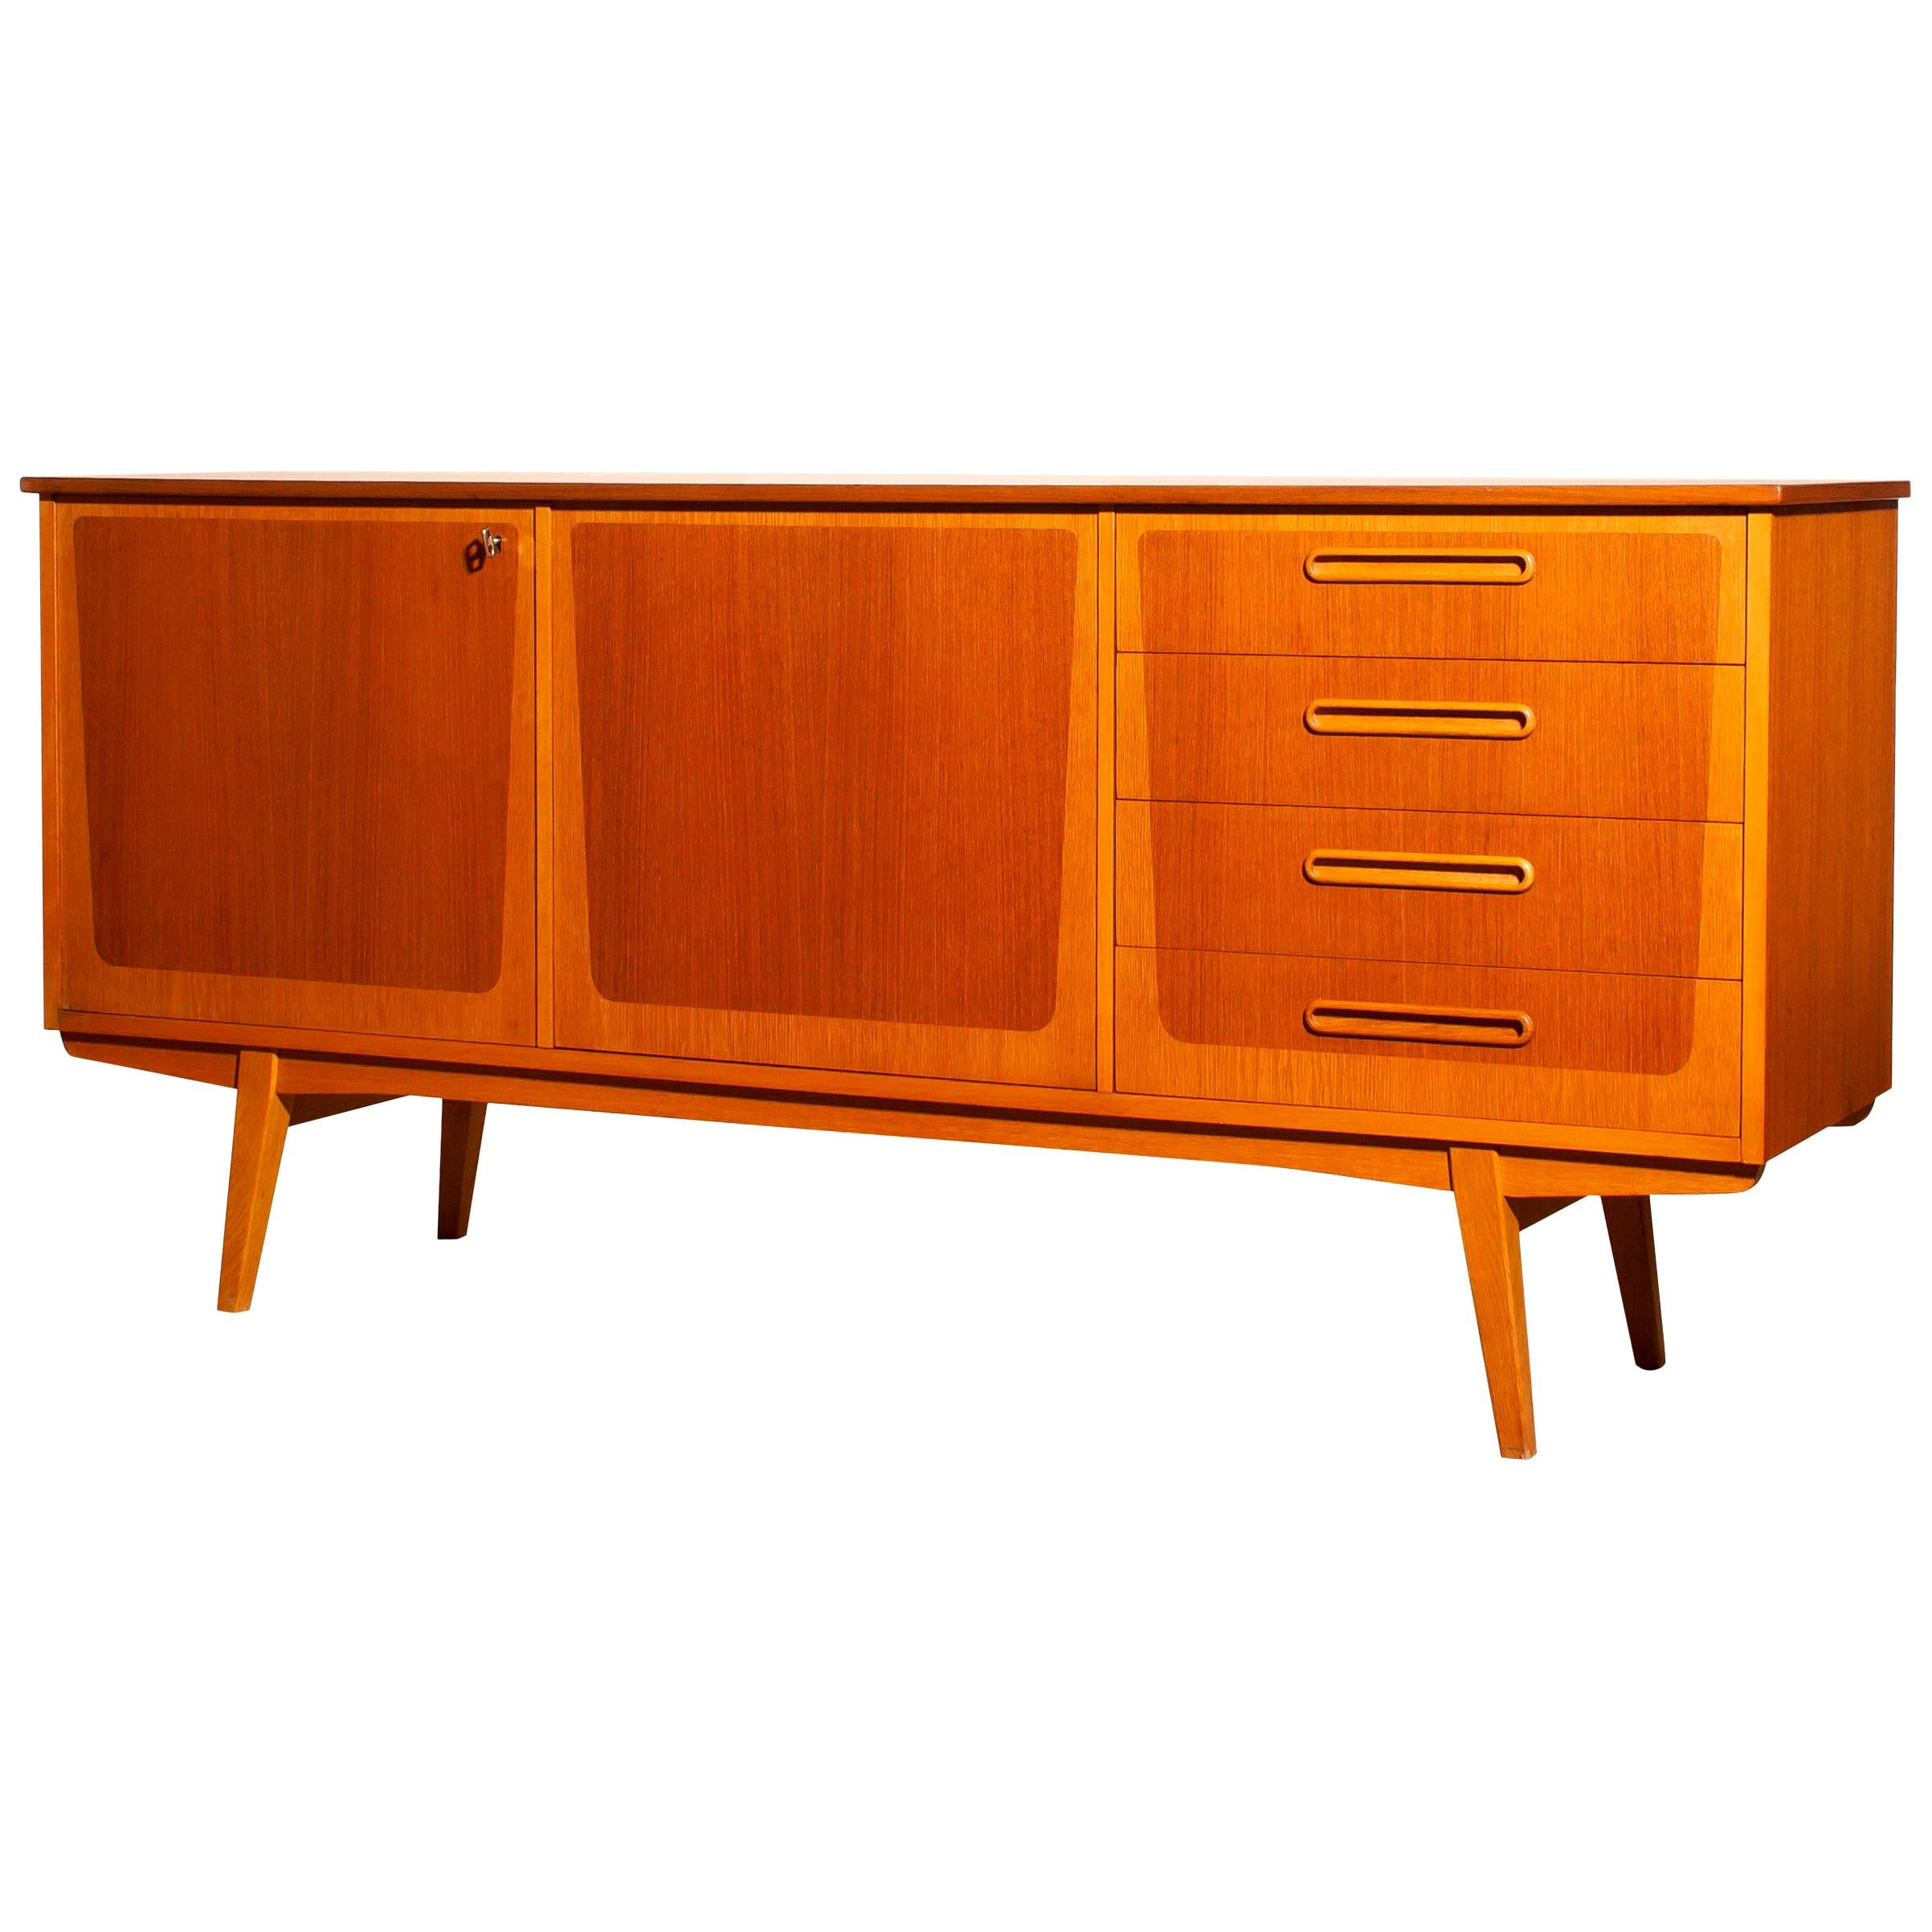 Beautiful sideboard from Sweden.
This cabinet is made of teak and oak.
It has two doors and four drawers.
It is in very good condition.
Period: 1960s.
Dimensions: H 80 cm, W 172 cm, D 43 cm.